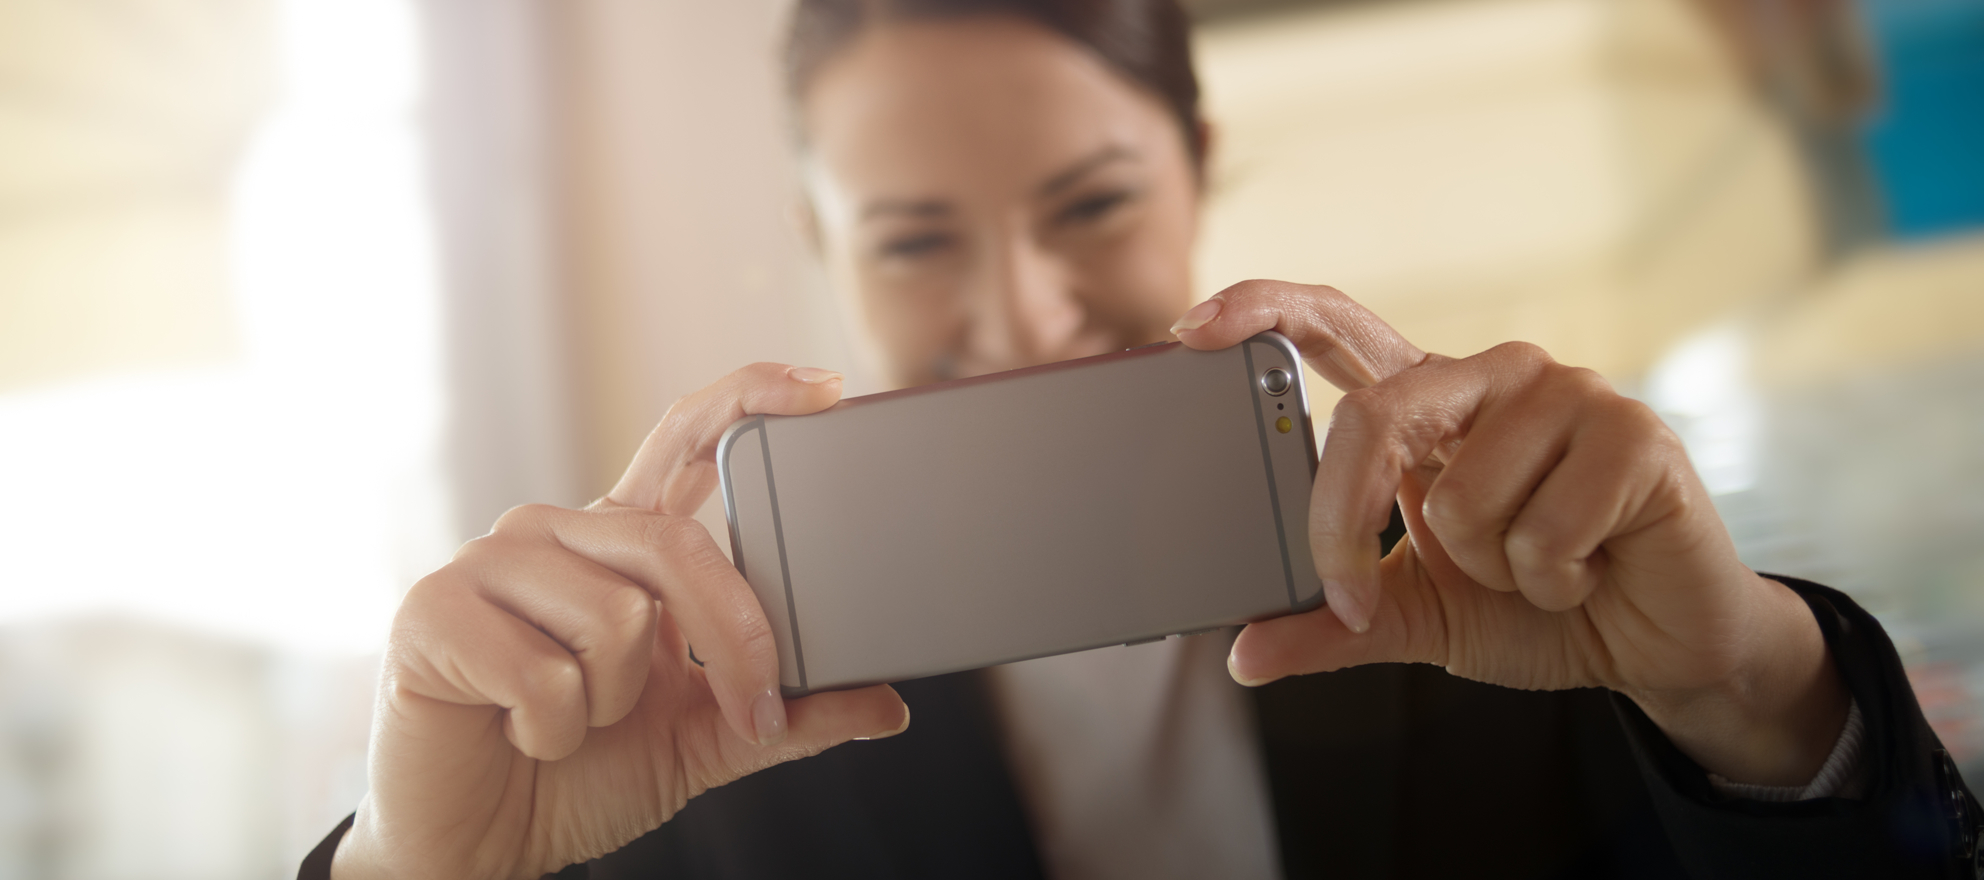 A woman taking a picture with her iPhone.